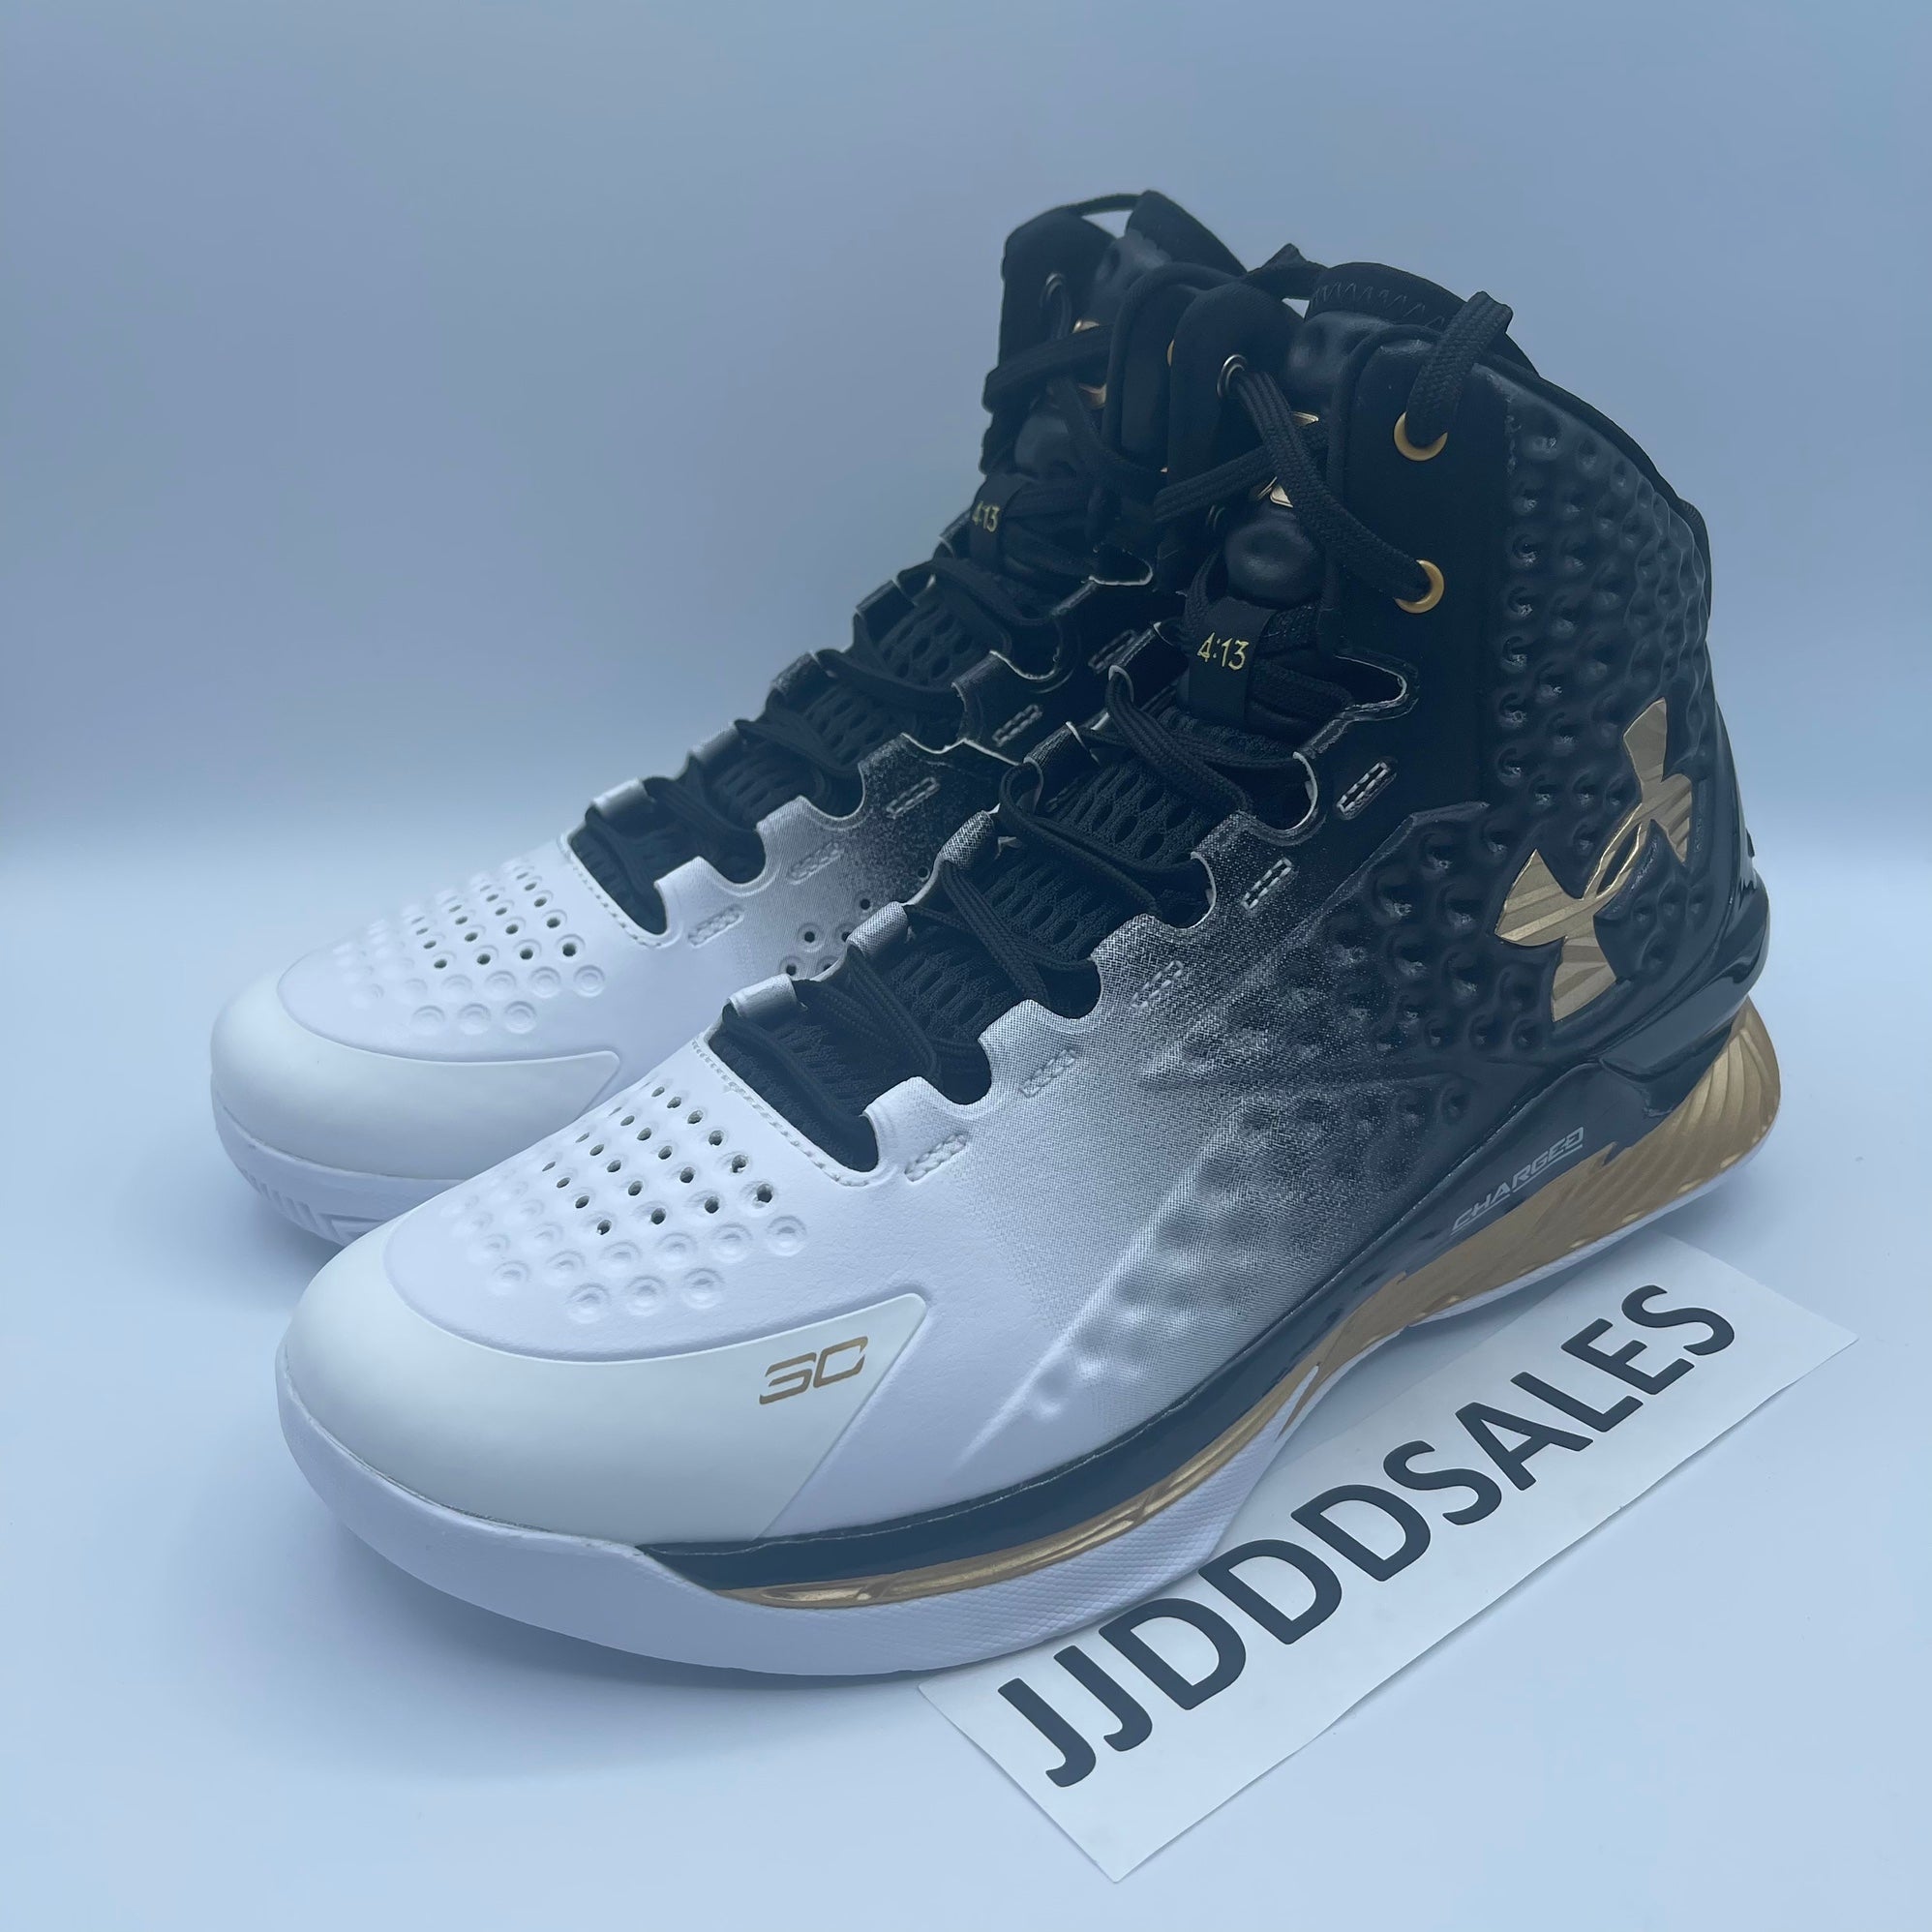 Under Armour Curry 2.5 Basketball Shoes   SidelineSwap